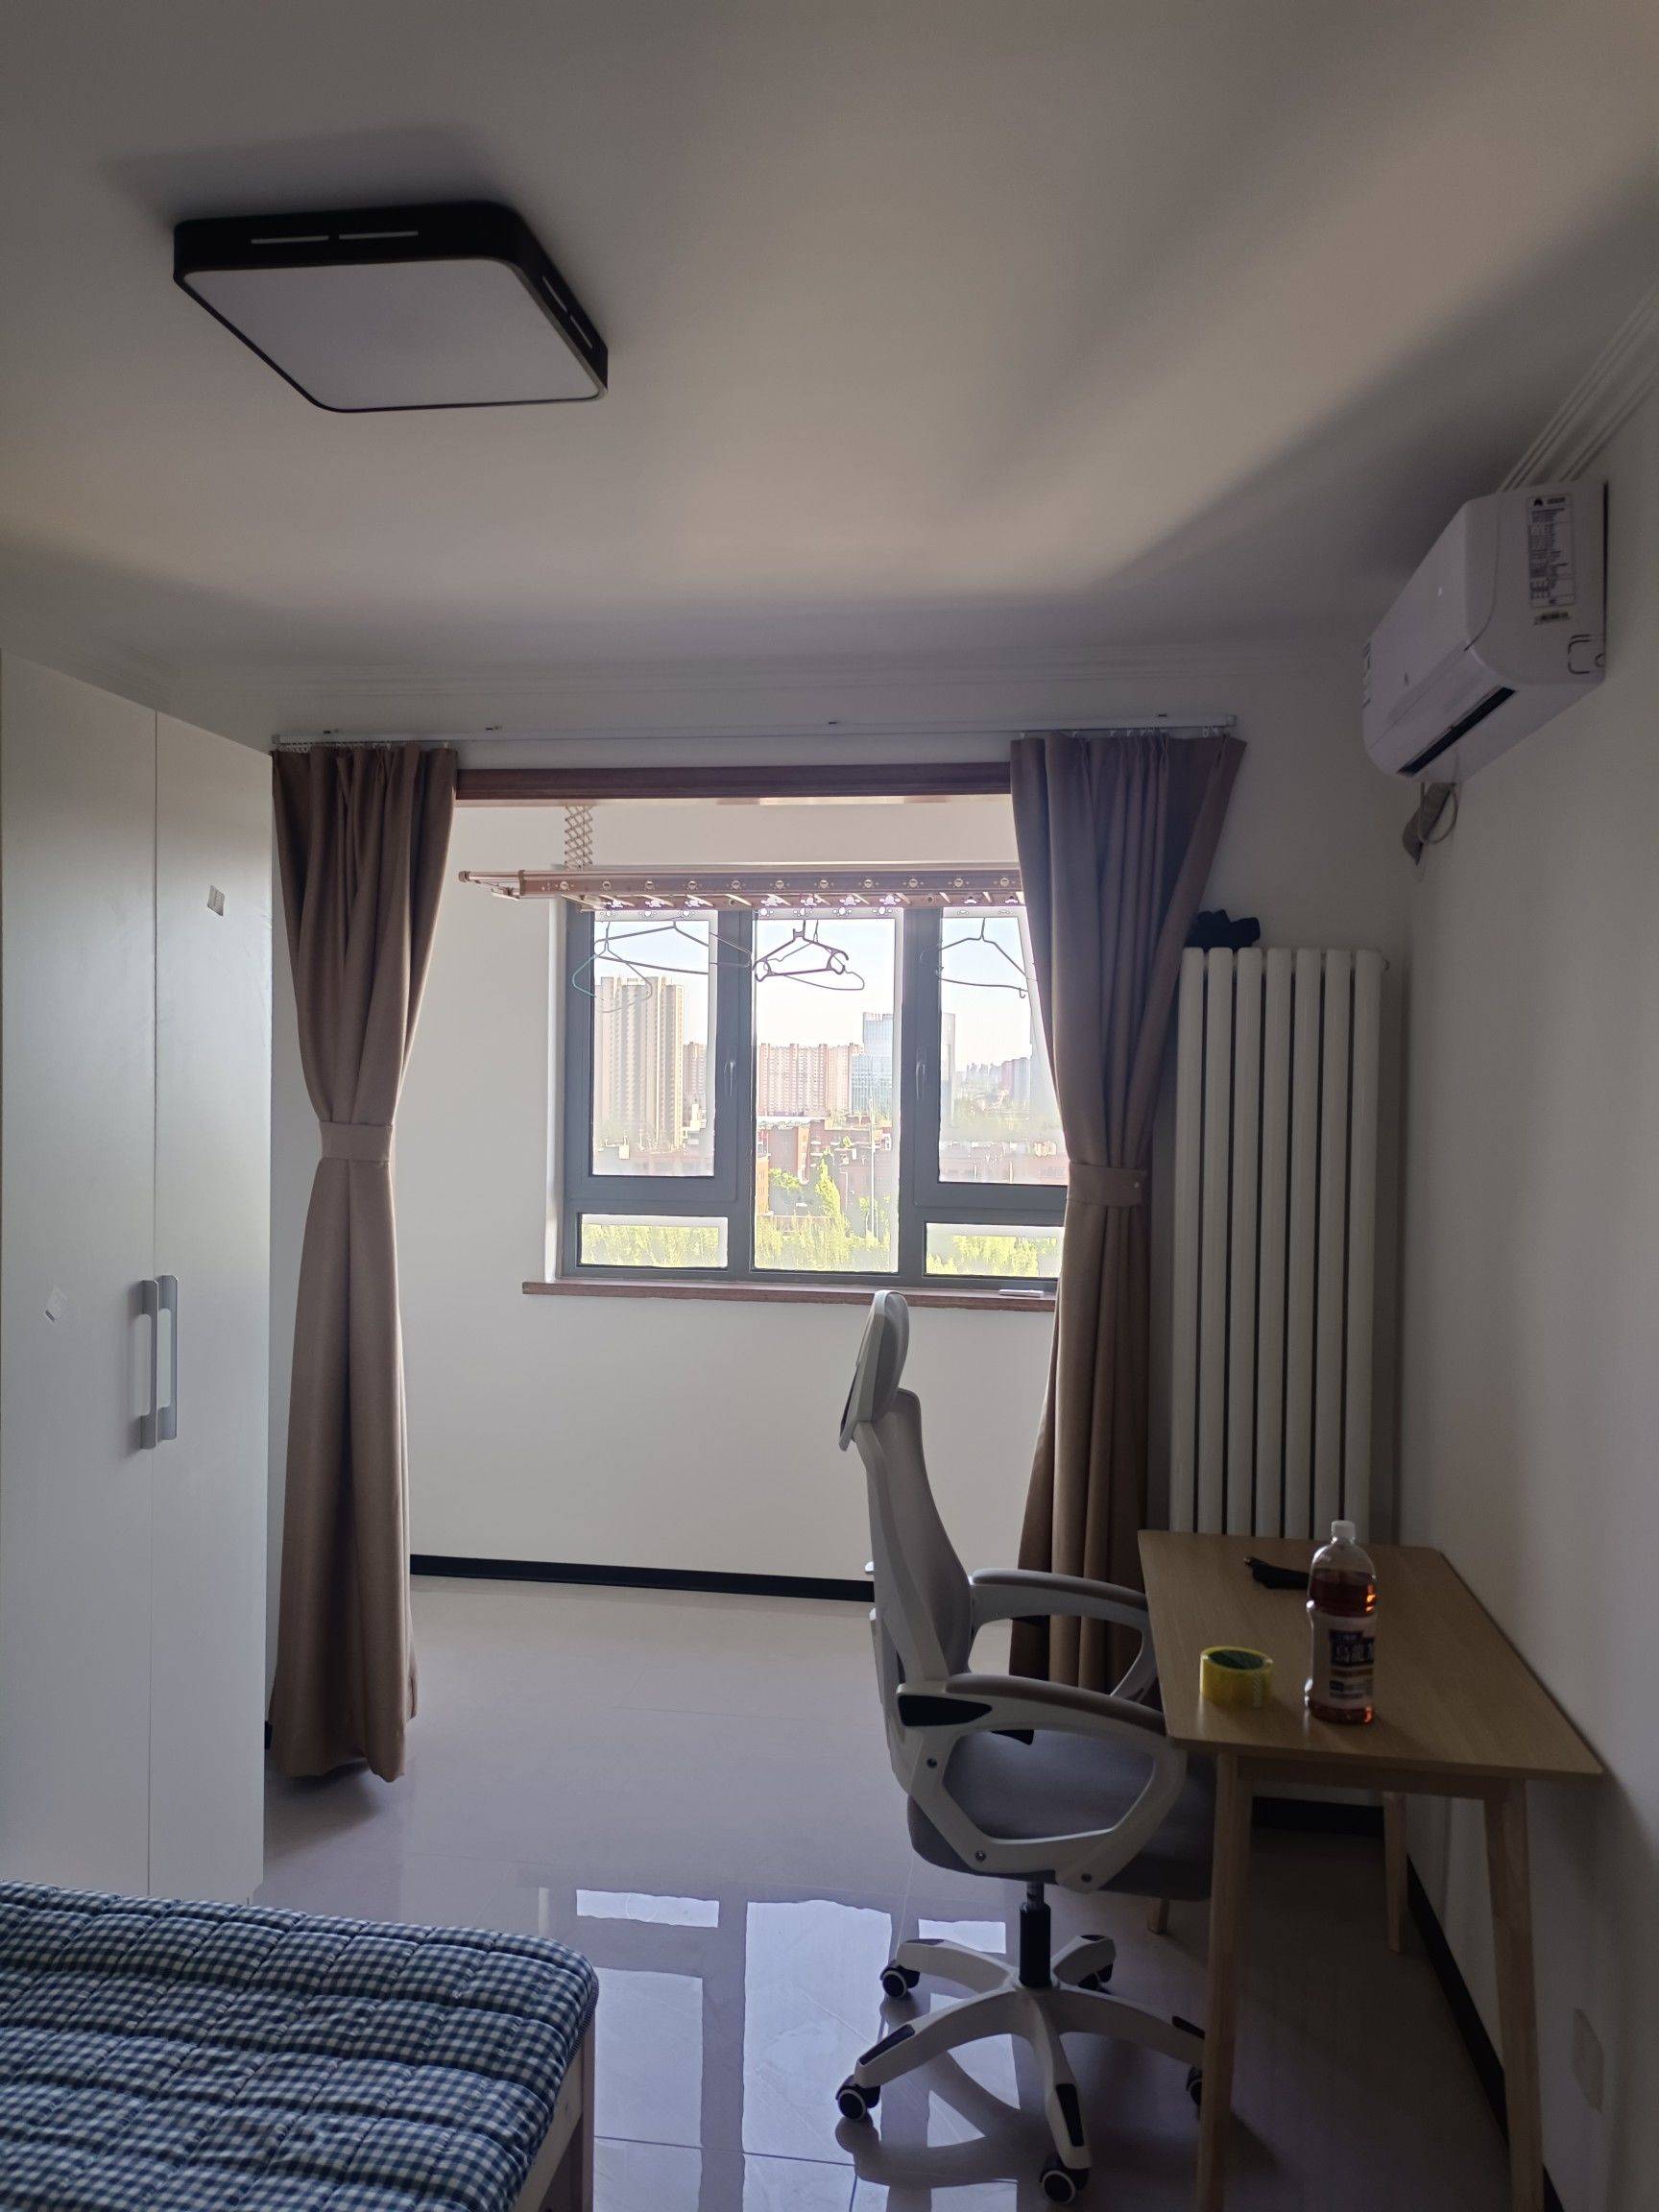 Beijing-Chaoyang-Cozy Home,Clean&Comfy